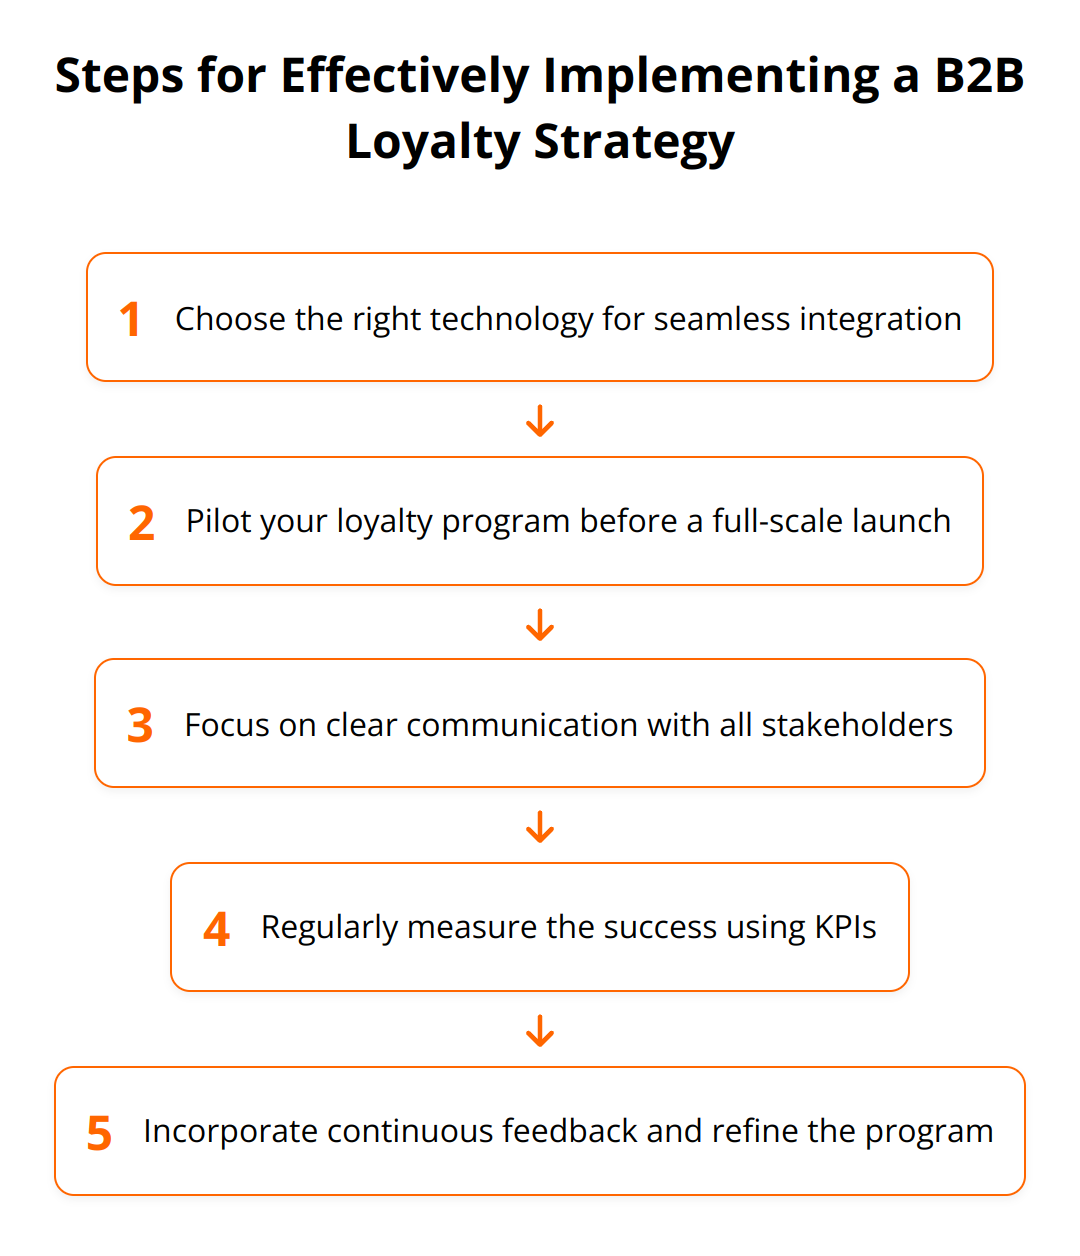 Flow Chart - Steps for Effectively Implementing a B2B Loyalty Strategy